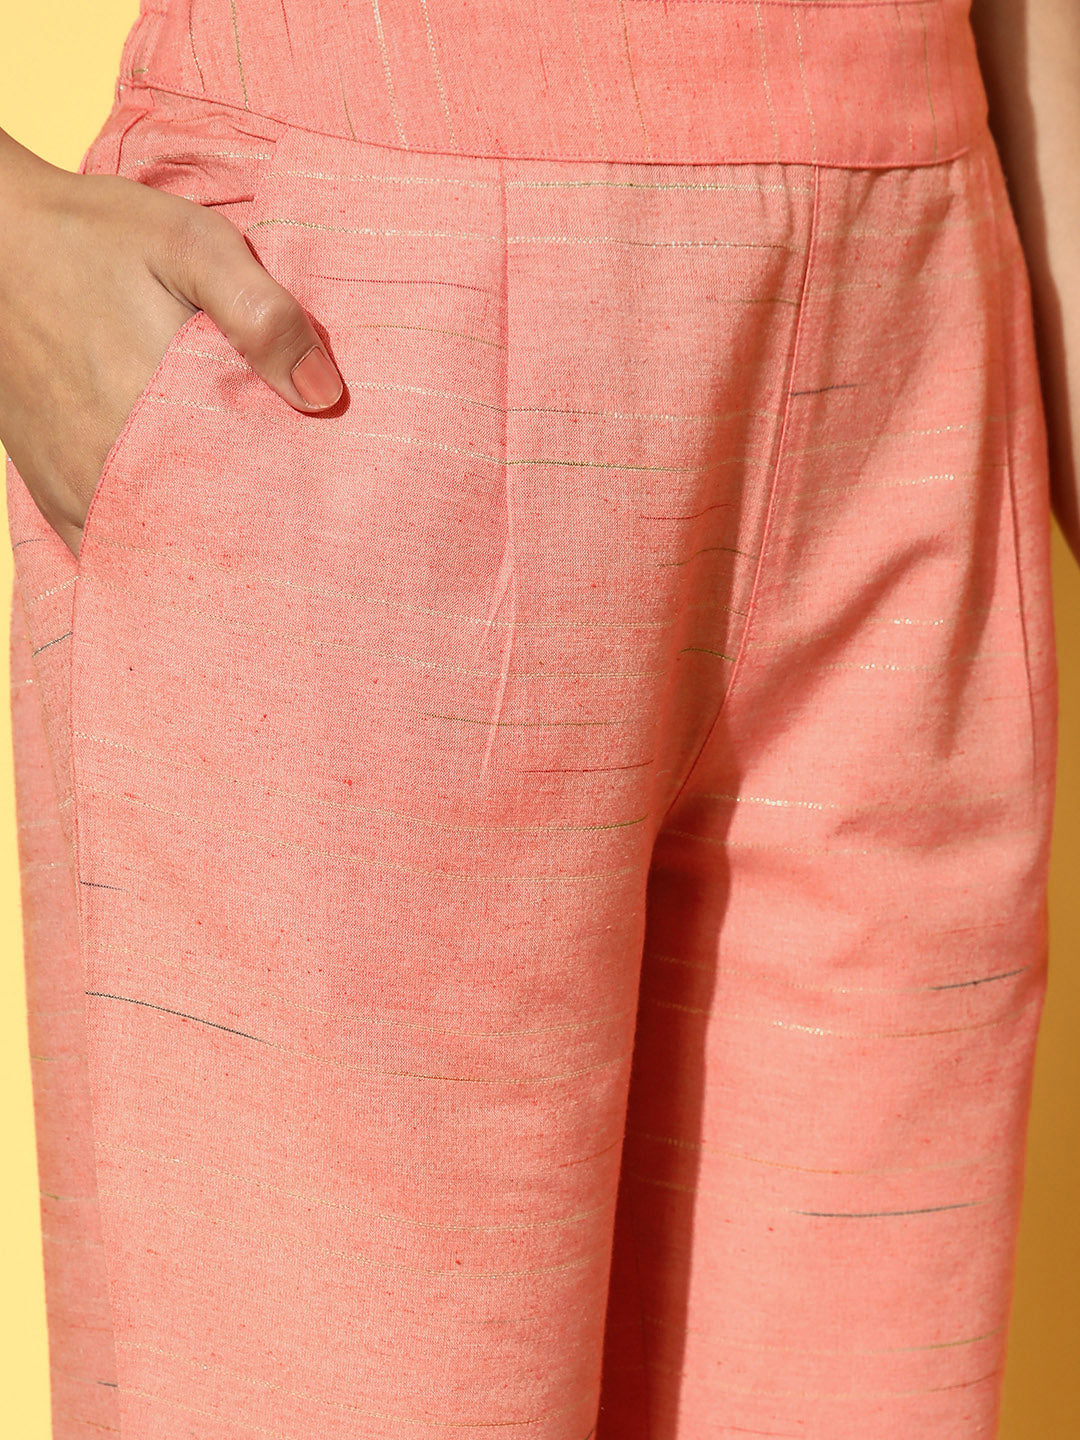 Pink Embroidered Yarn Dyed Kurta With Pants